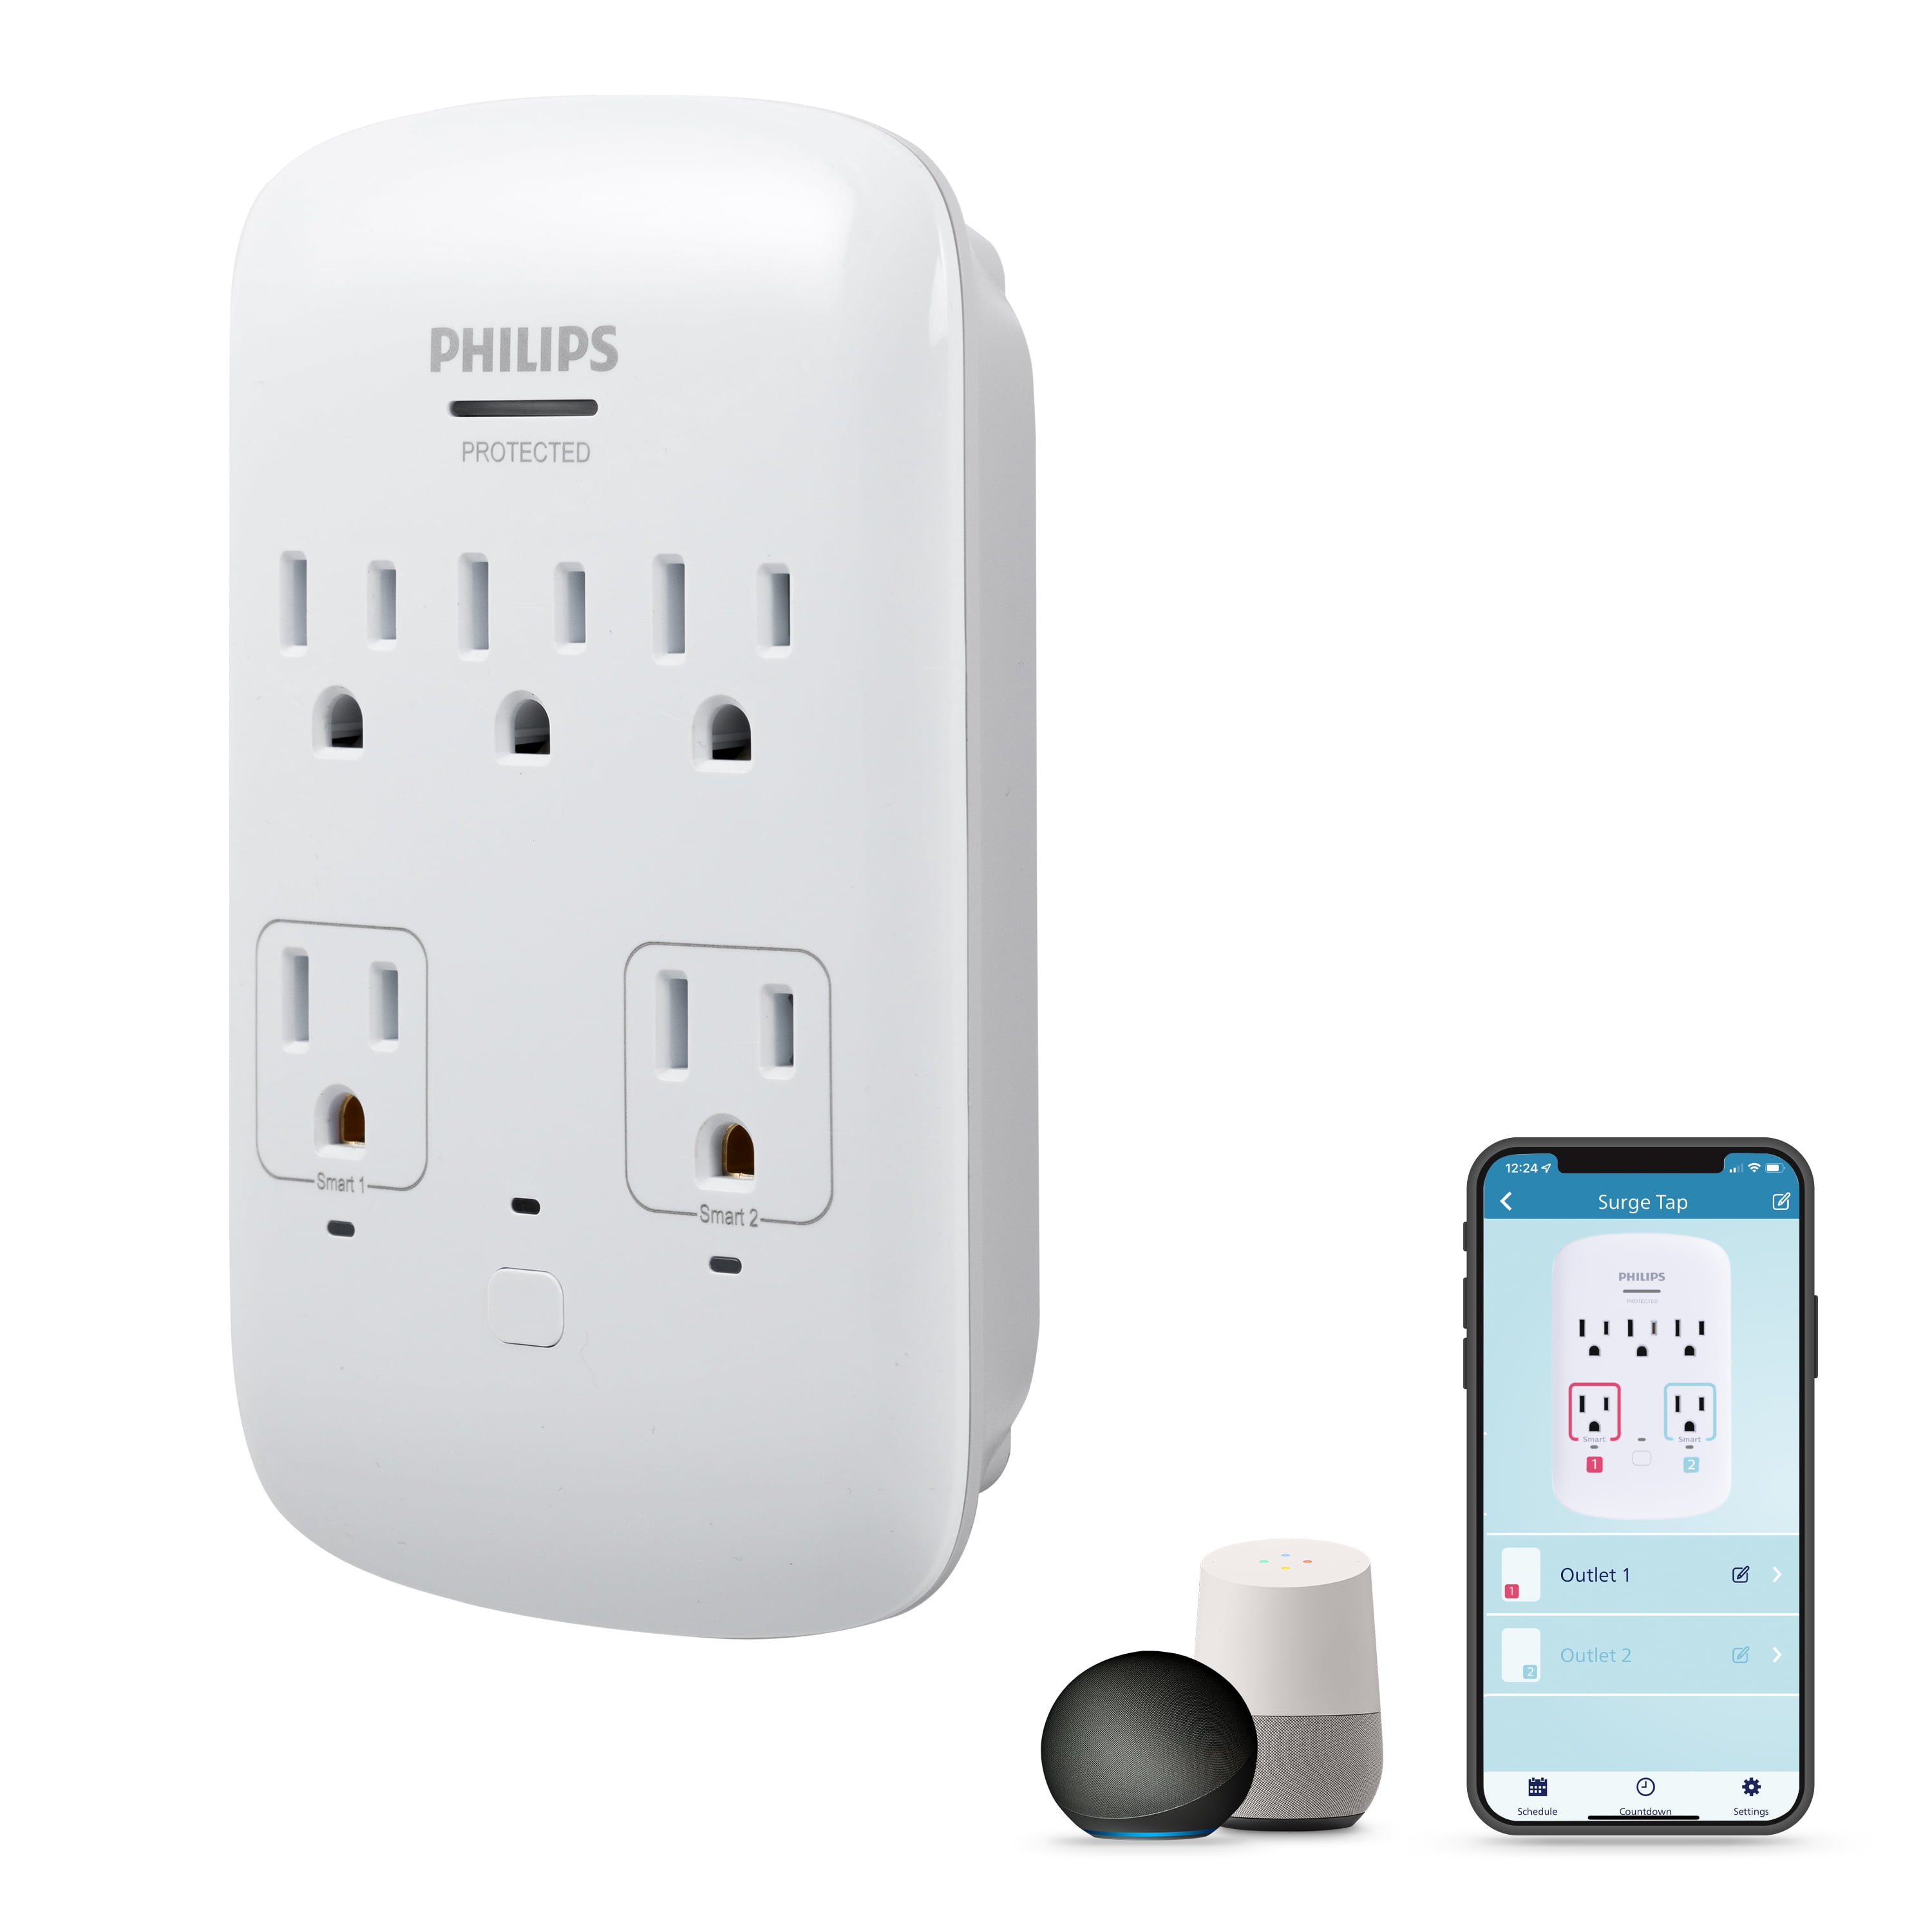 Wall Tap Protected Indicator Light 2.4A Philips 6-Outlet Extender 2-USB Surge Protector Removable Device Charging Shelf White 12W SPS6024WA/37 Charging Station 450J Side Access Adapter 